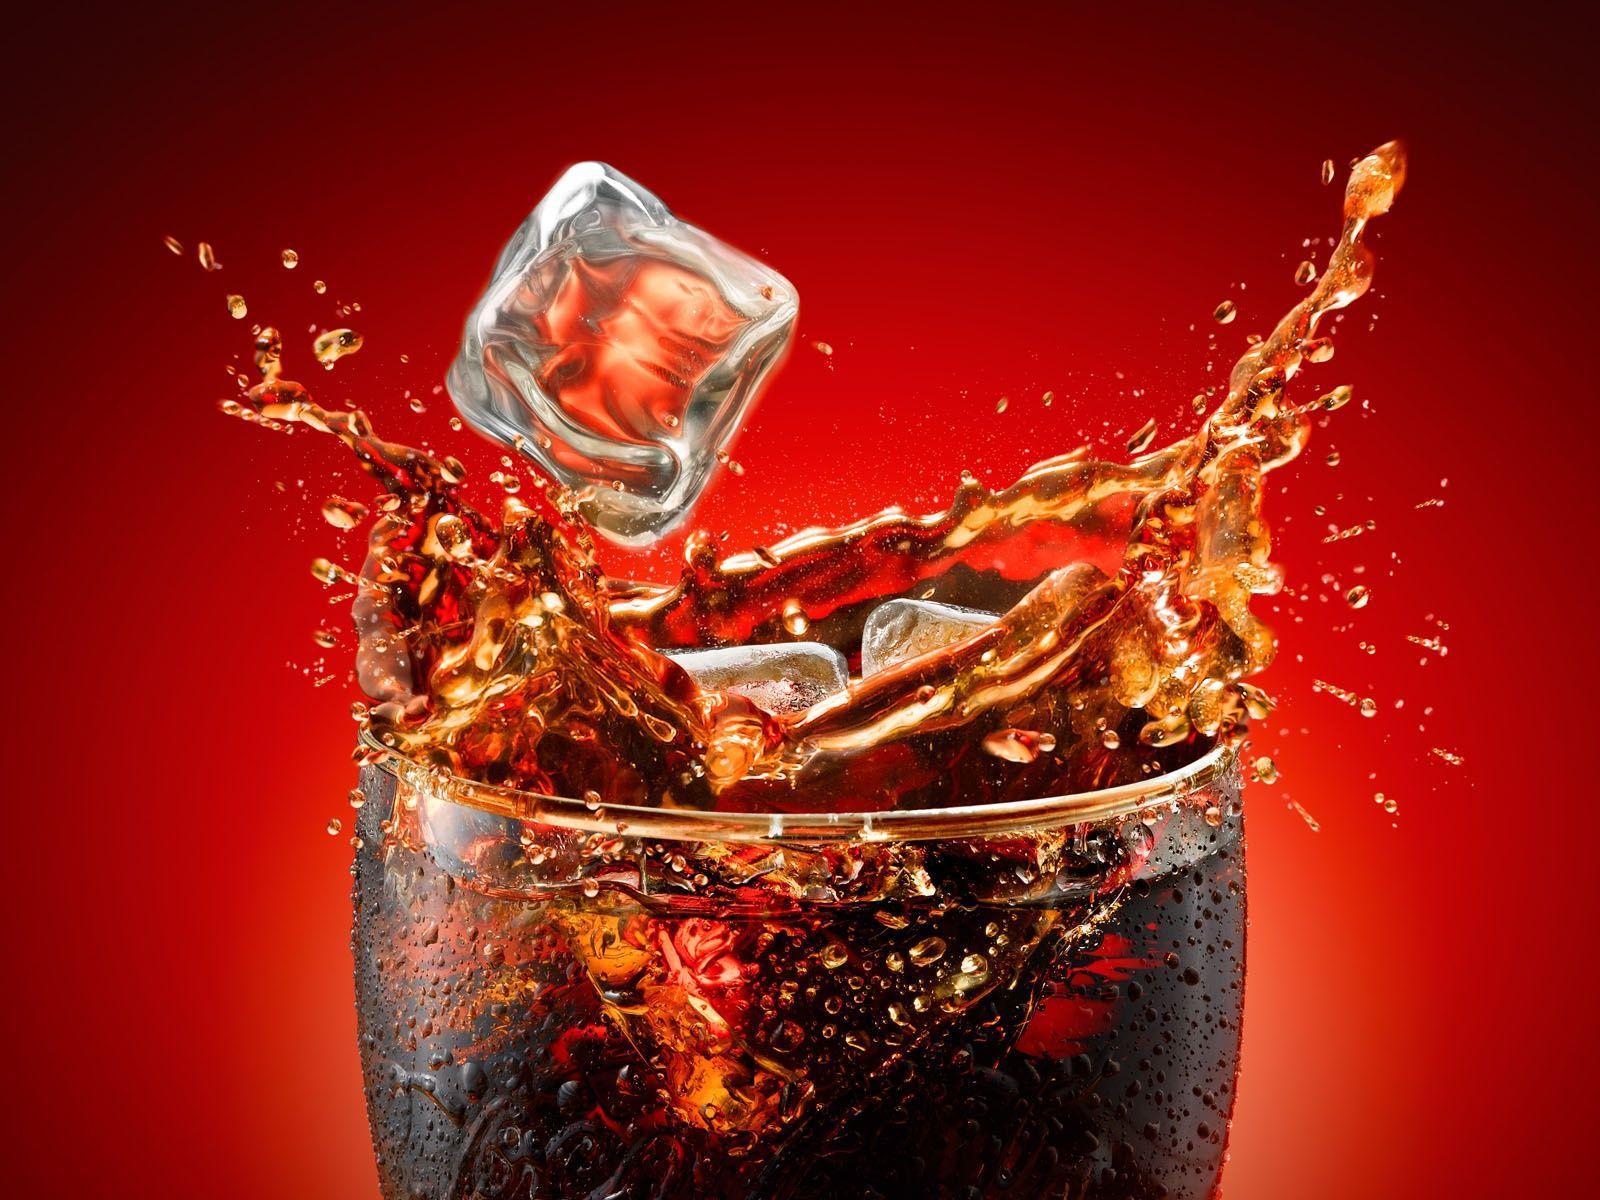 3D Coca Cola Wallpaper. HD 3D and Abstract Wallpaper for Mobile